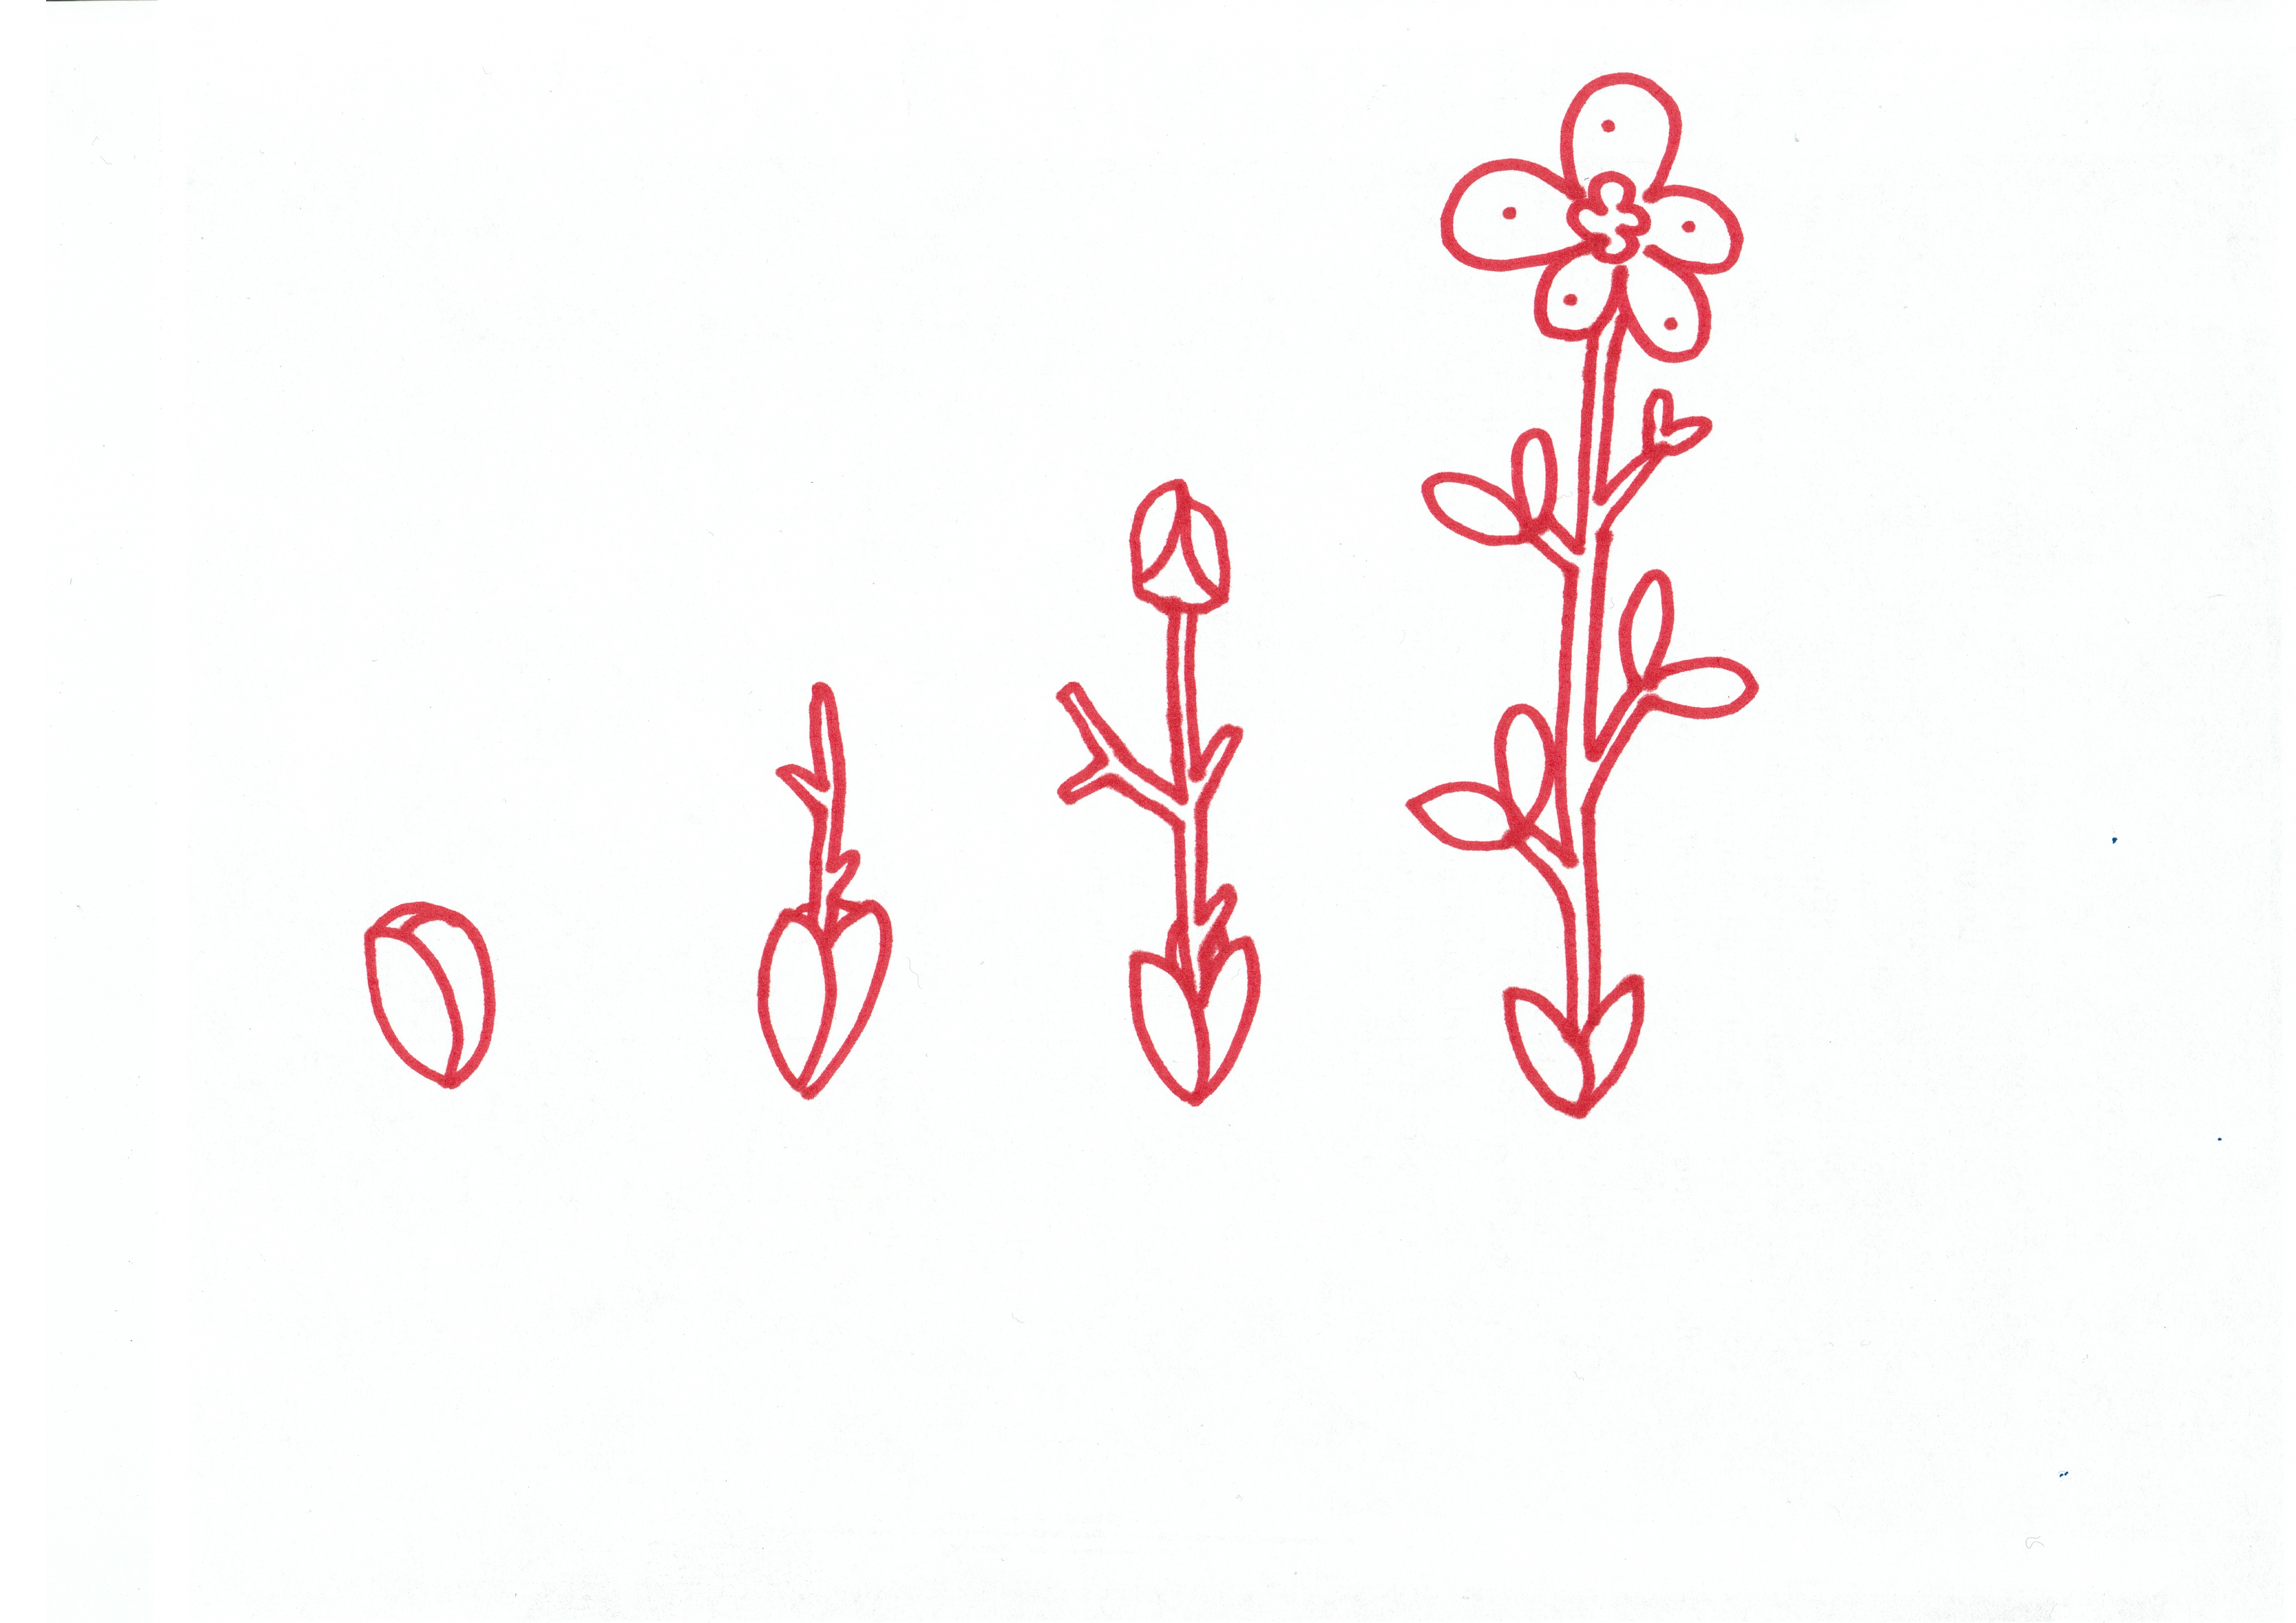 marker drawing in red of a bud growing into a flower in four steps